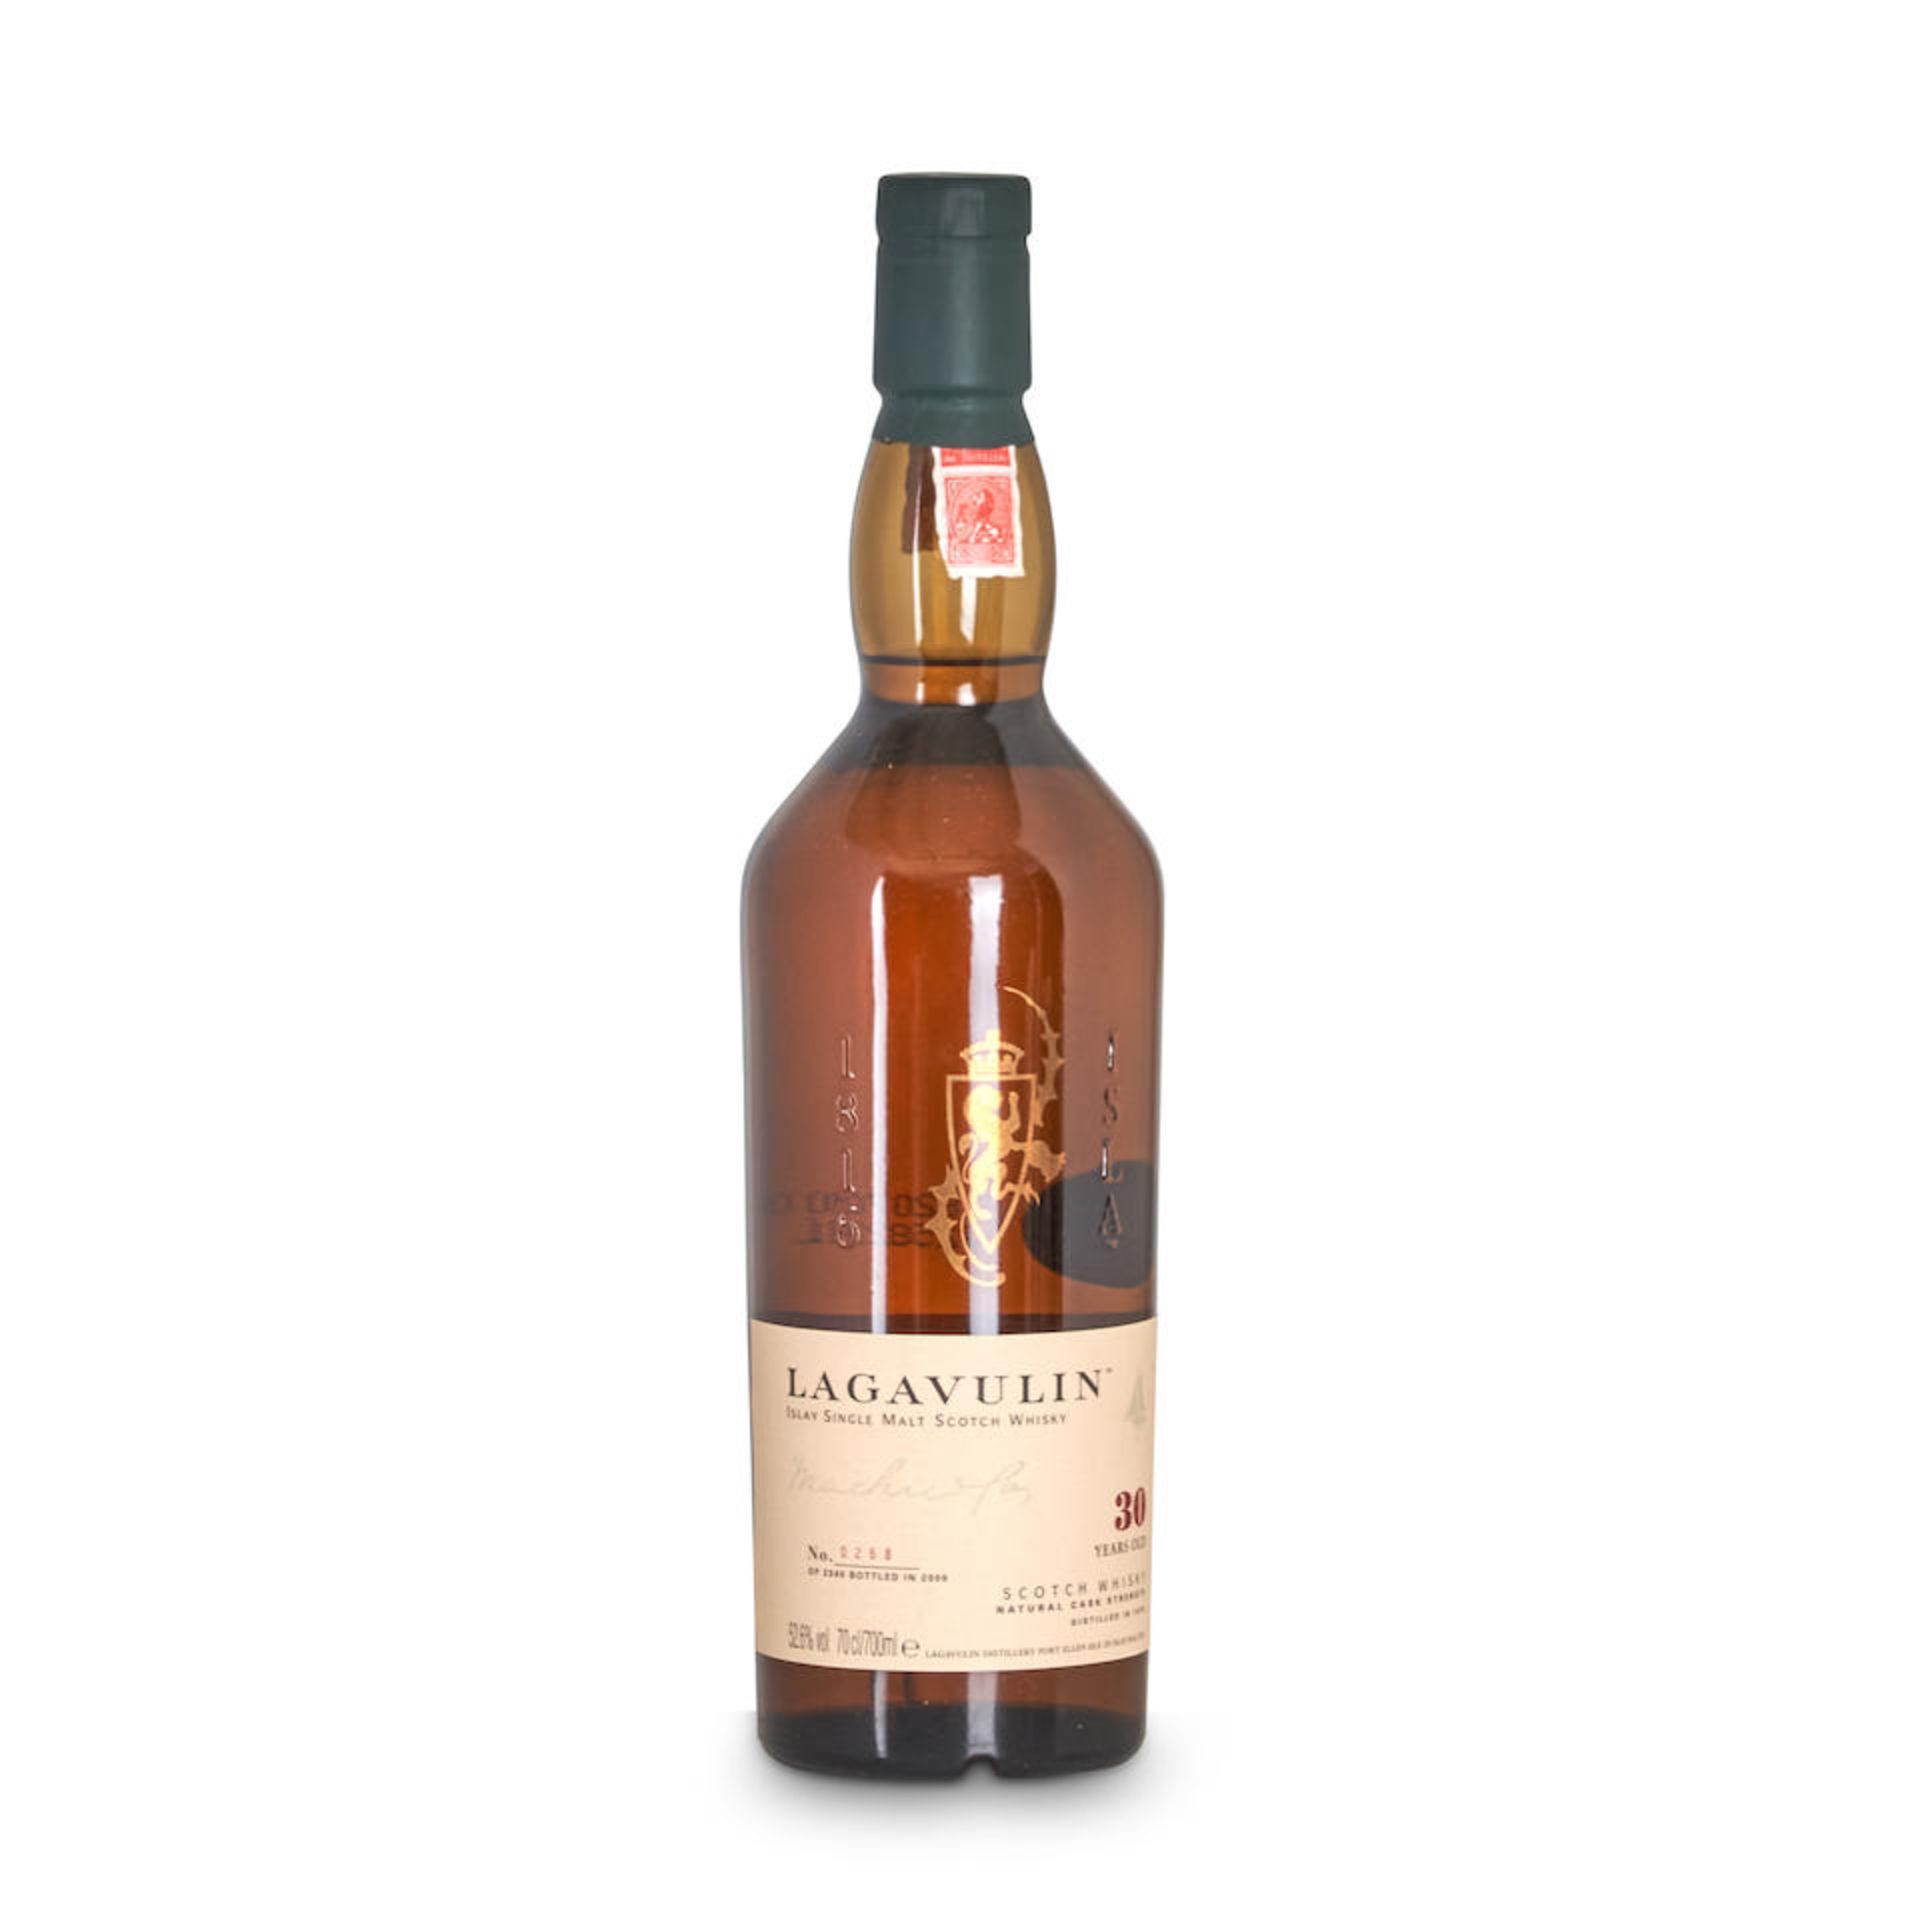 Lagavulin 30 Years Old (1 70cl bottle)